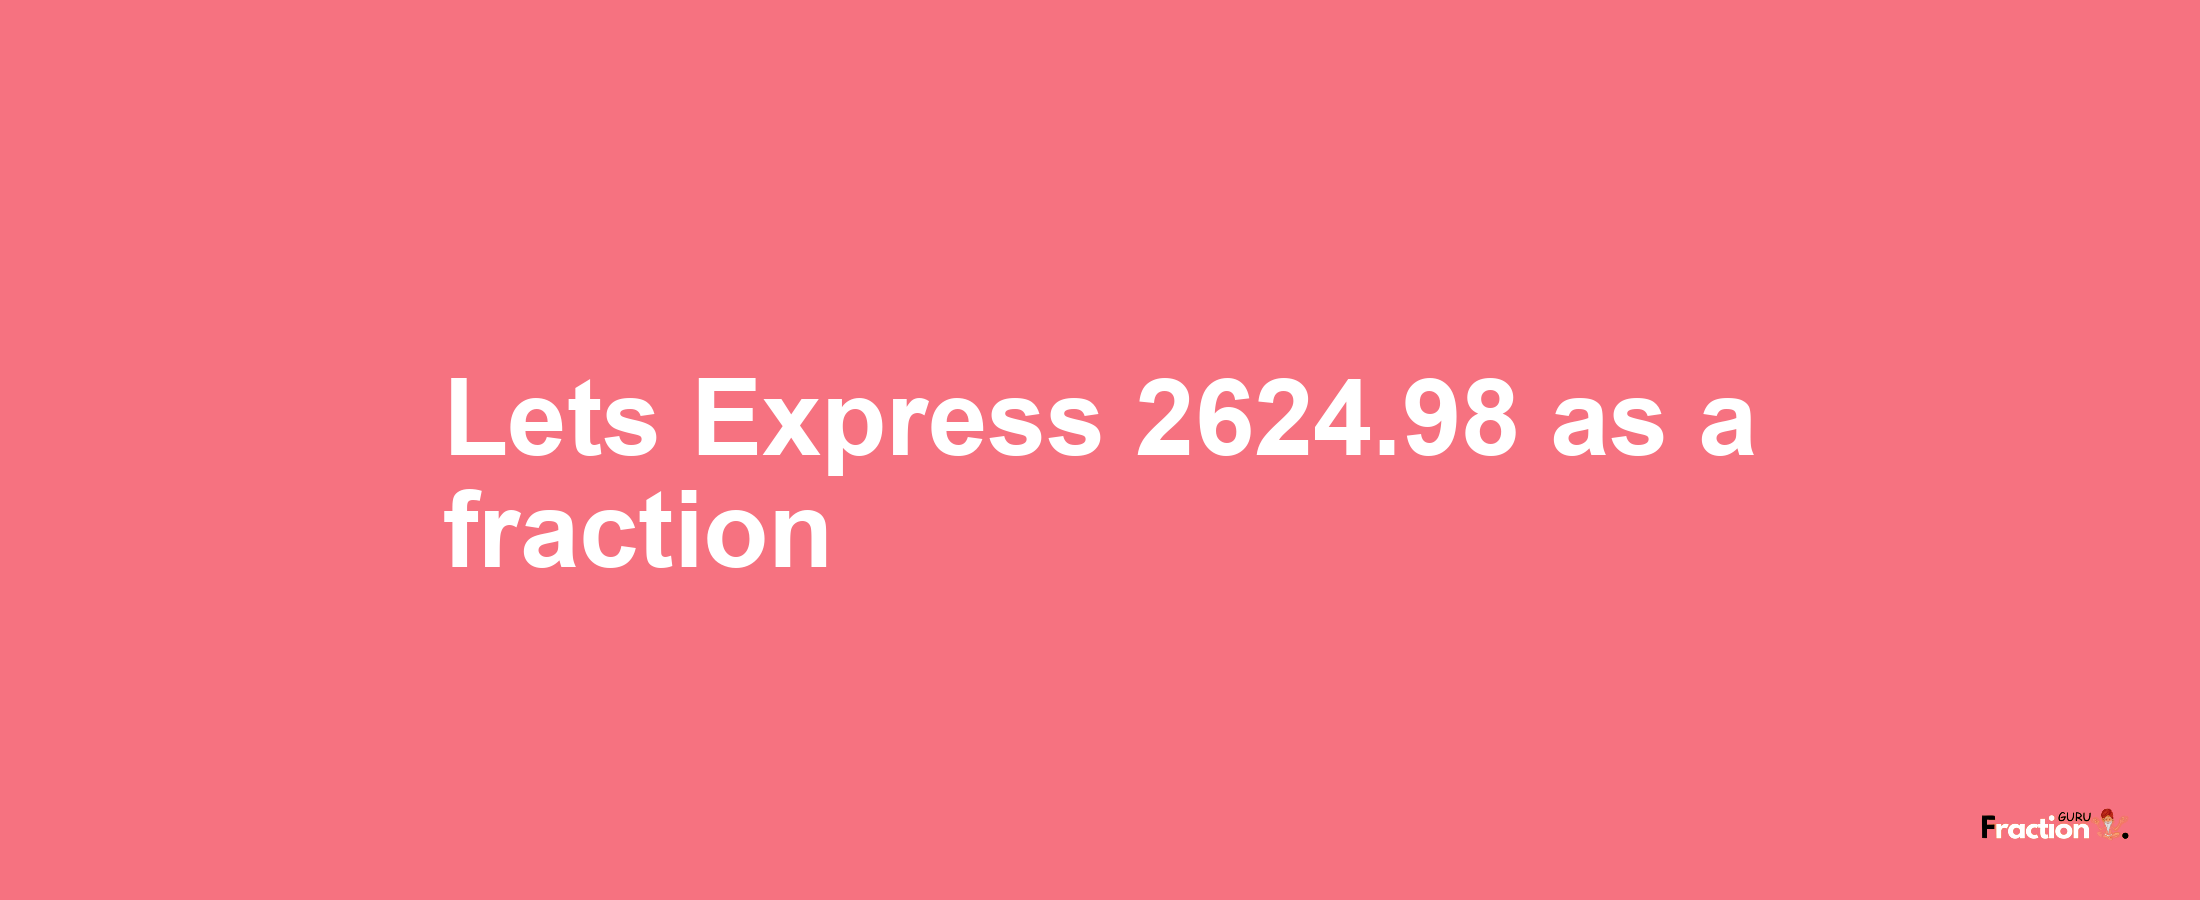 Lets Express 2624.98 as afraction